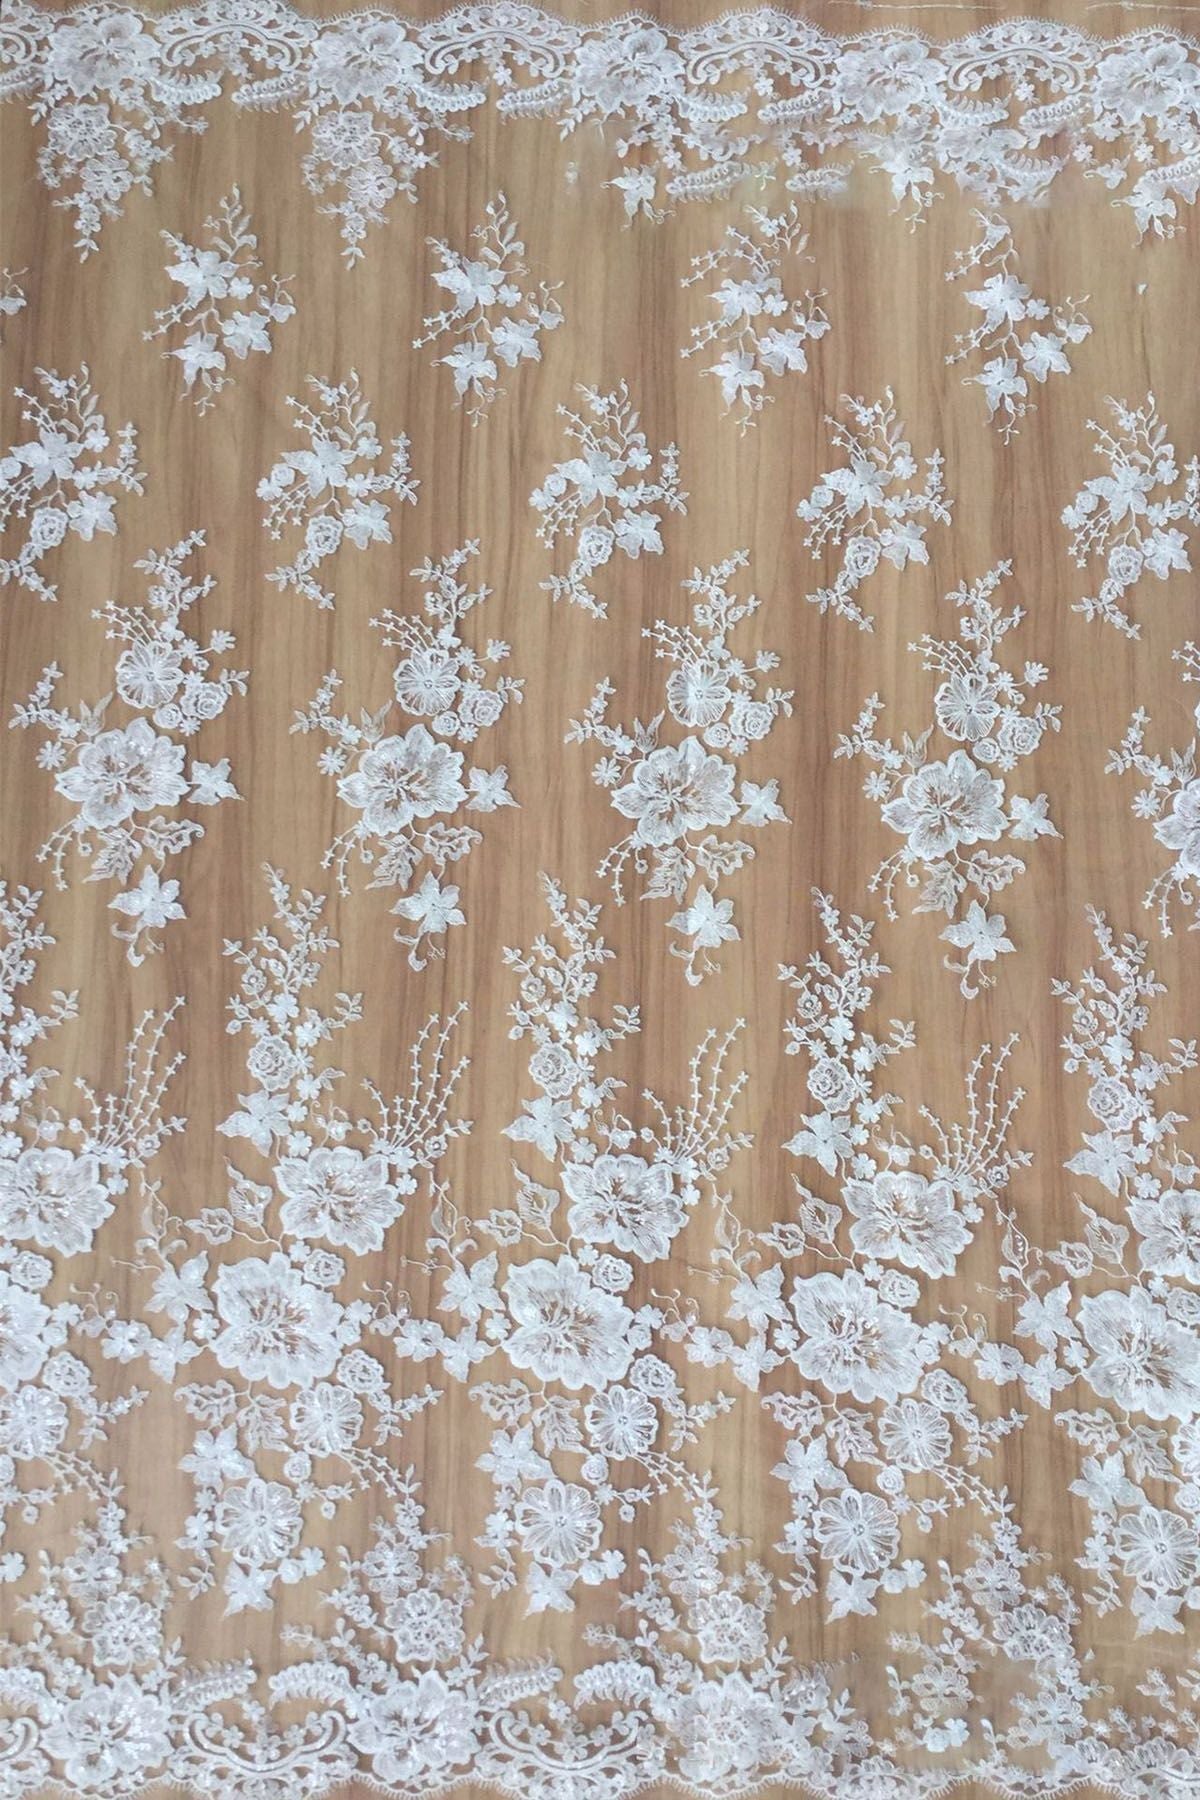 Shiny Sequined Flower Bridal Lace Fabric for Sale